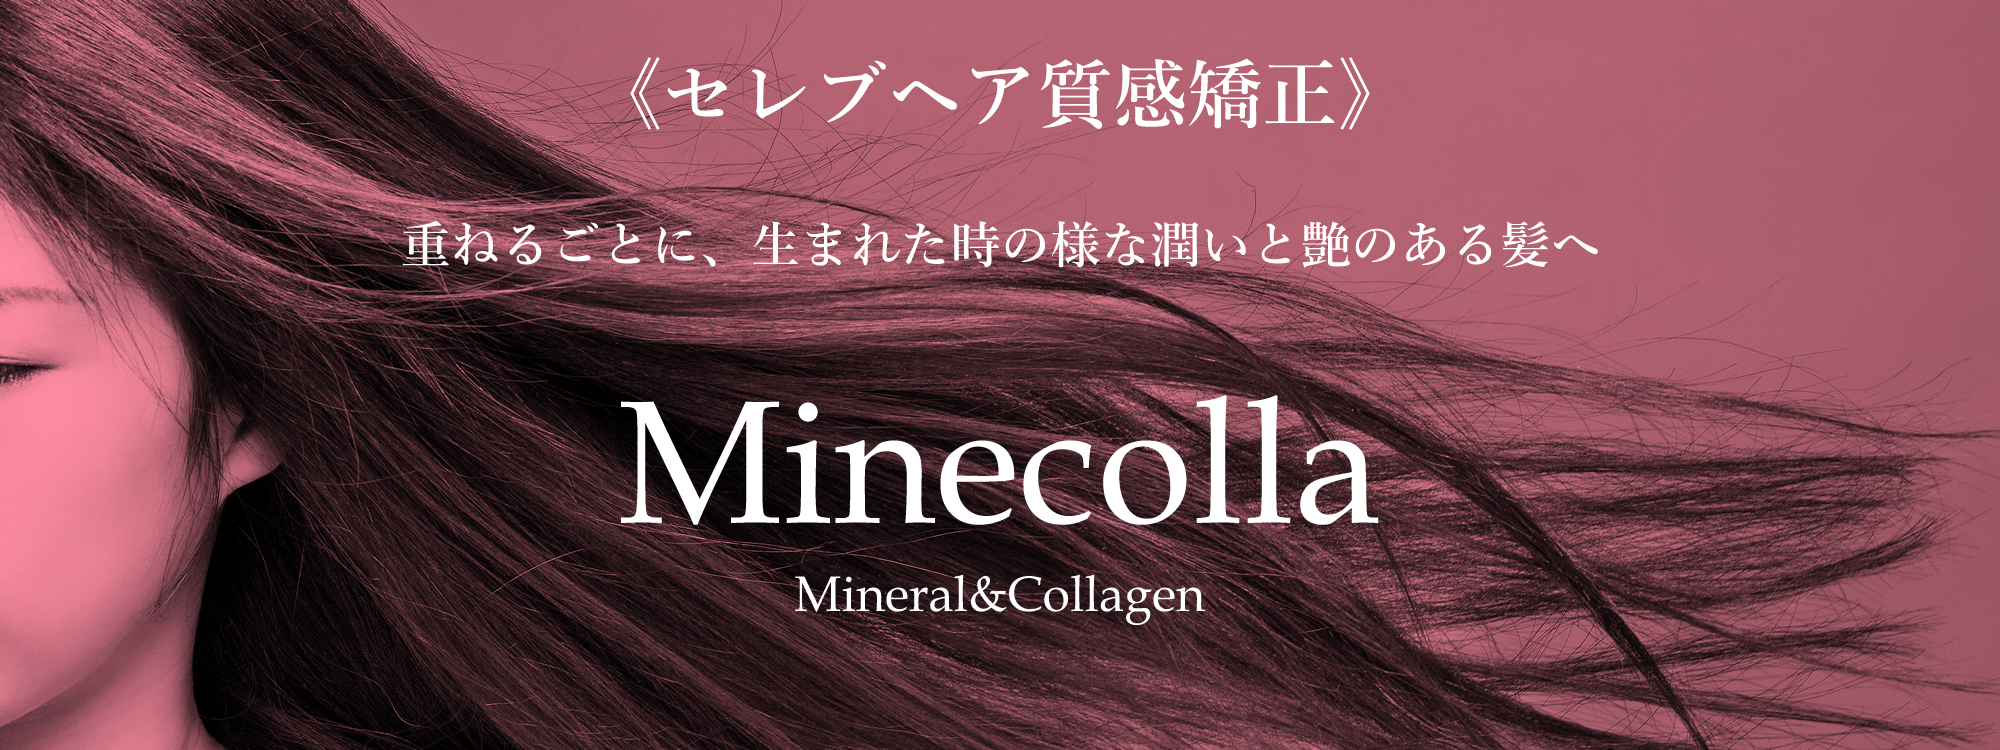 minecolla02.png